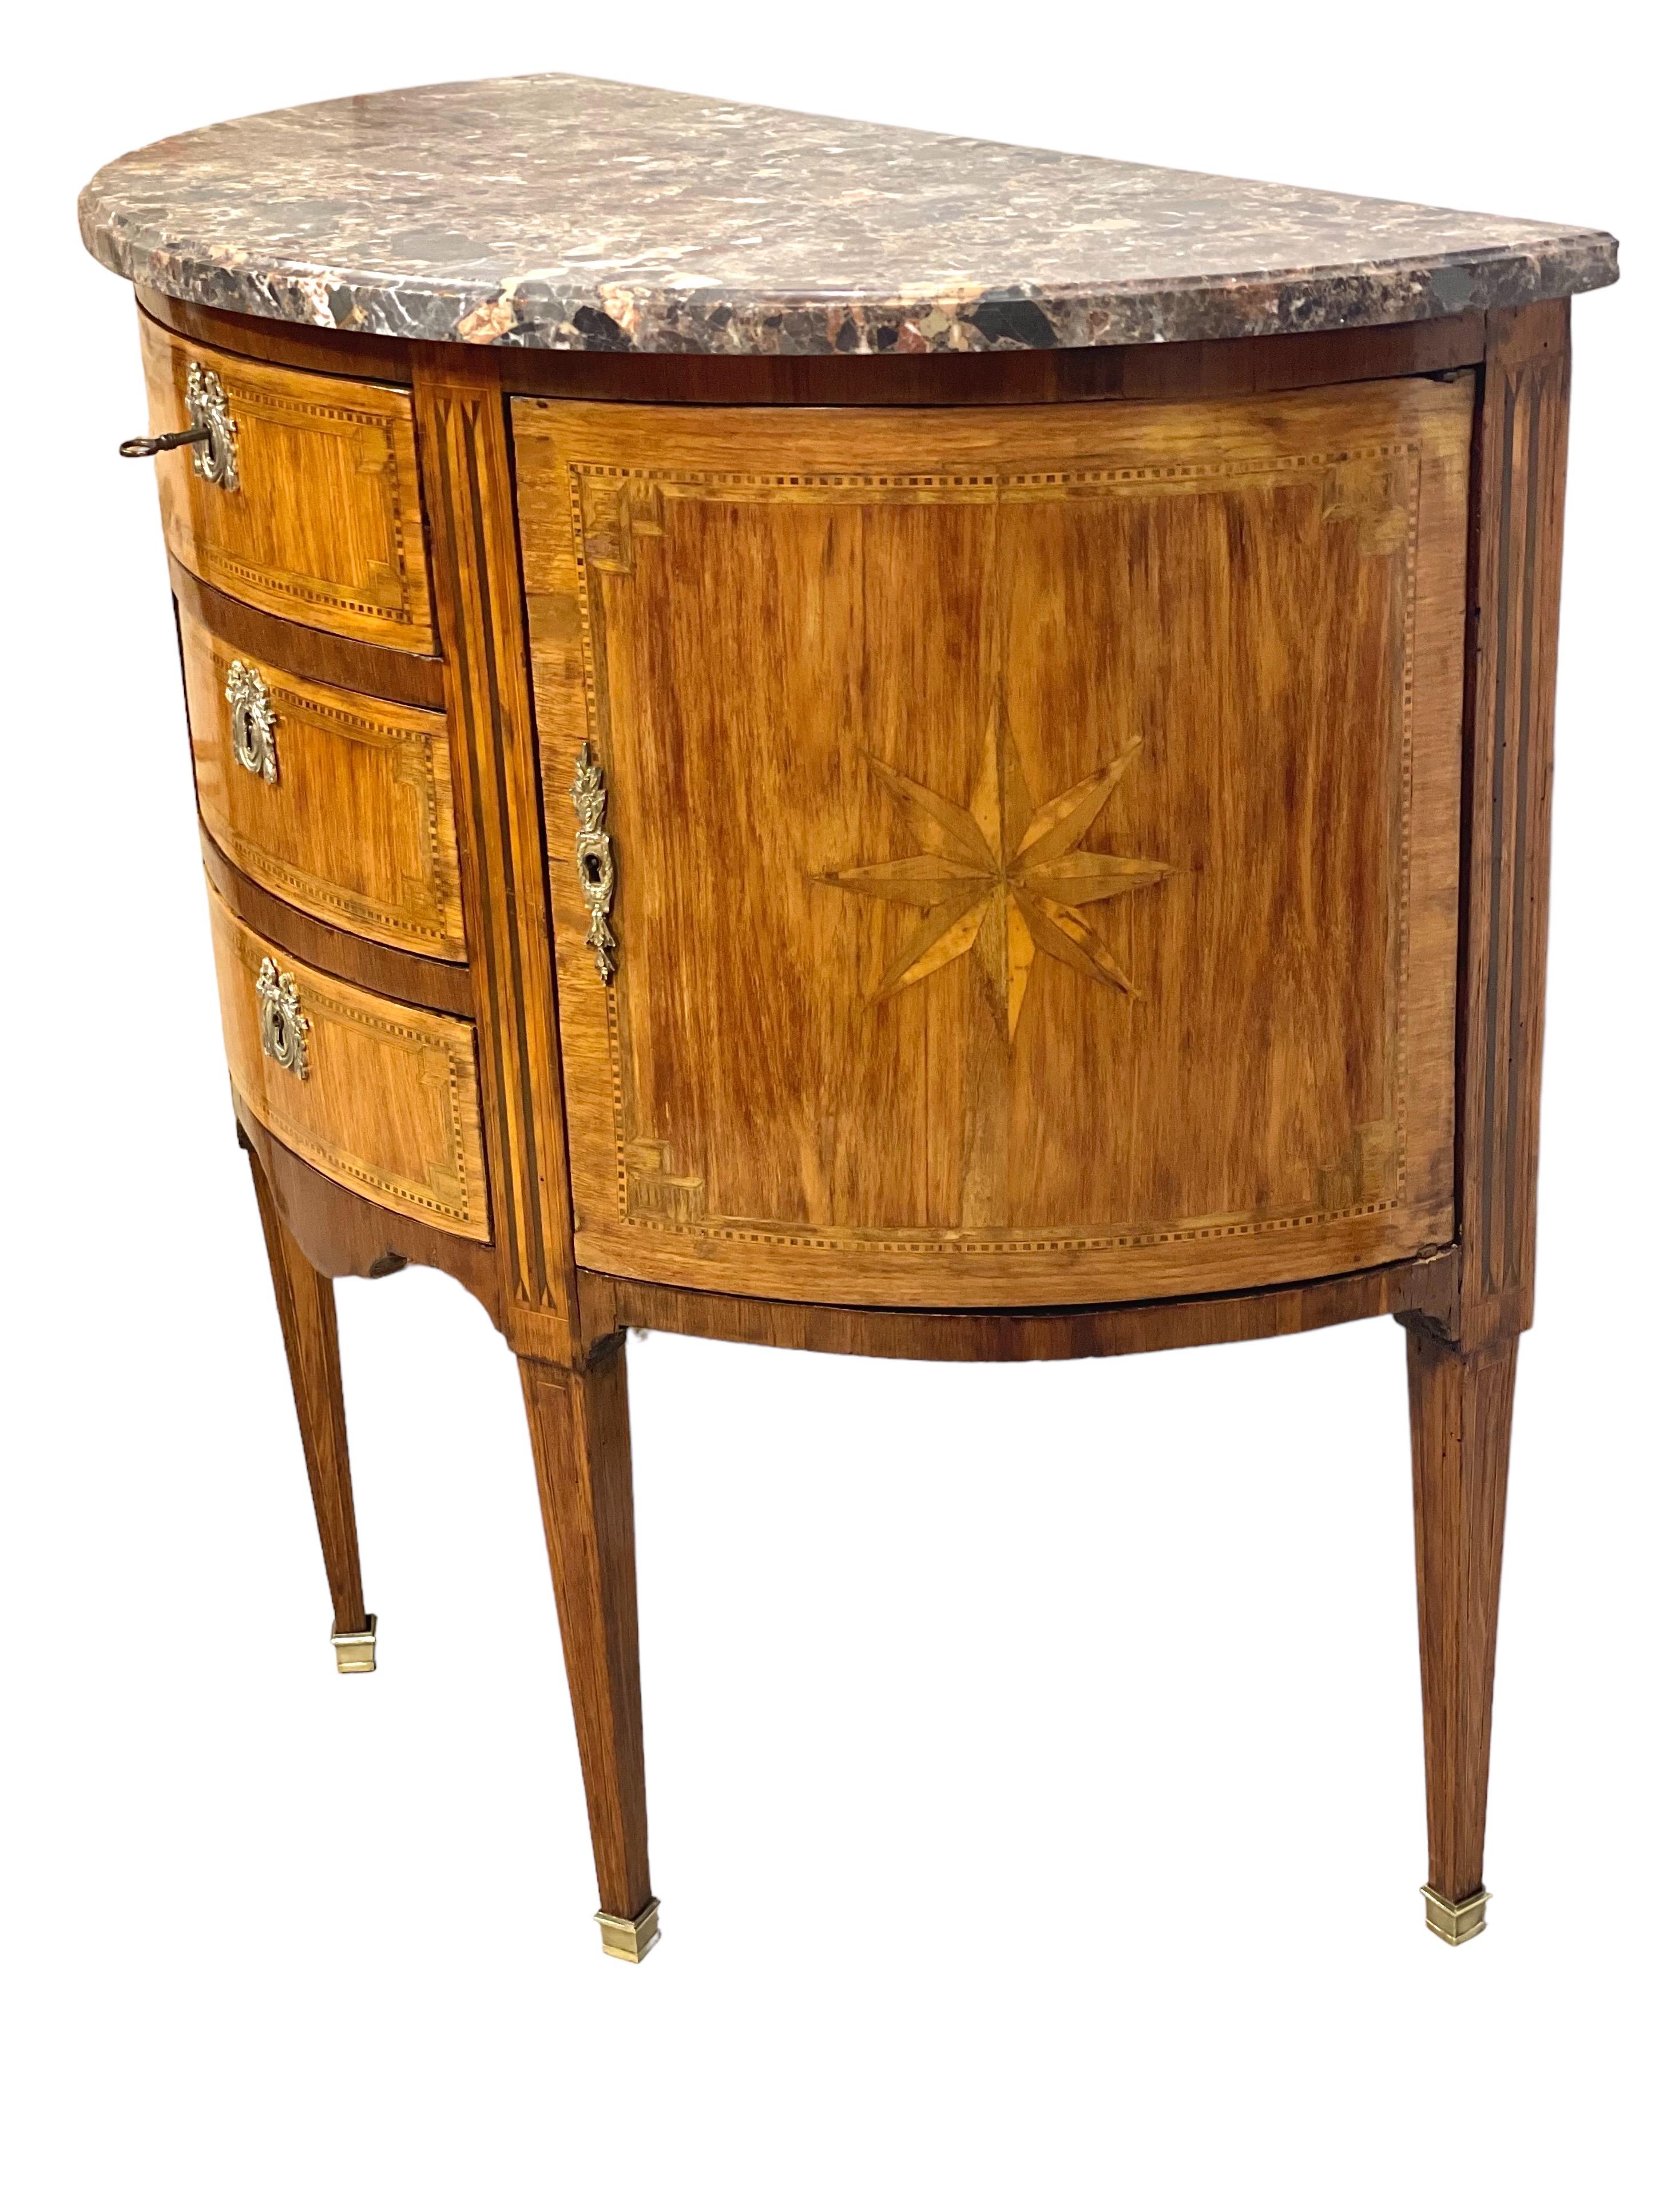 A gorgeous demi-lune (half-moon) shaped chest of drawers in wood veneer. Opening with three drawers and two side leaves, under a marble top, this attractive Louis XVI style commode would make a useful addition to a bedroom or hallway.